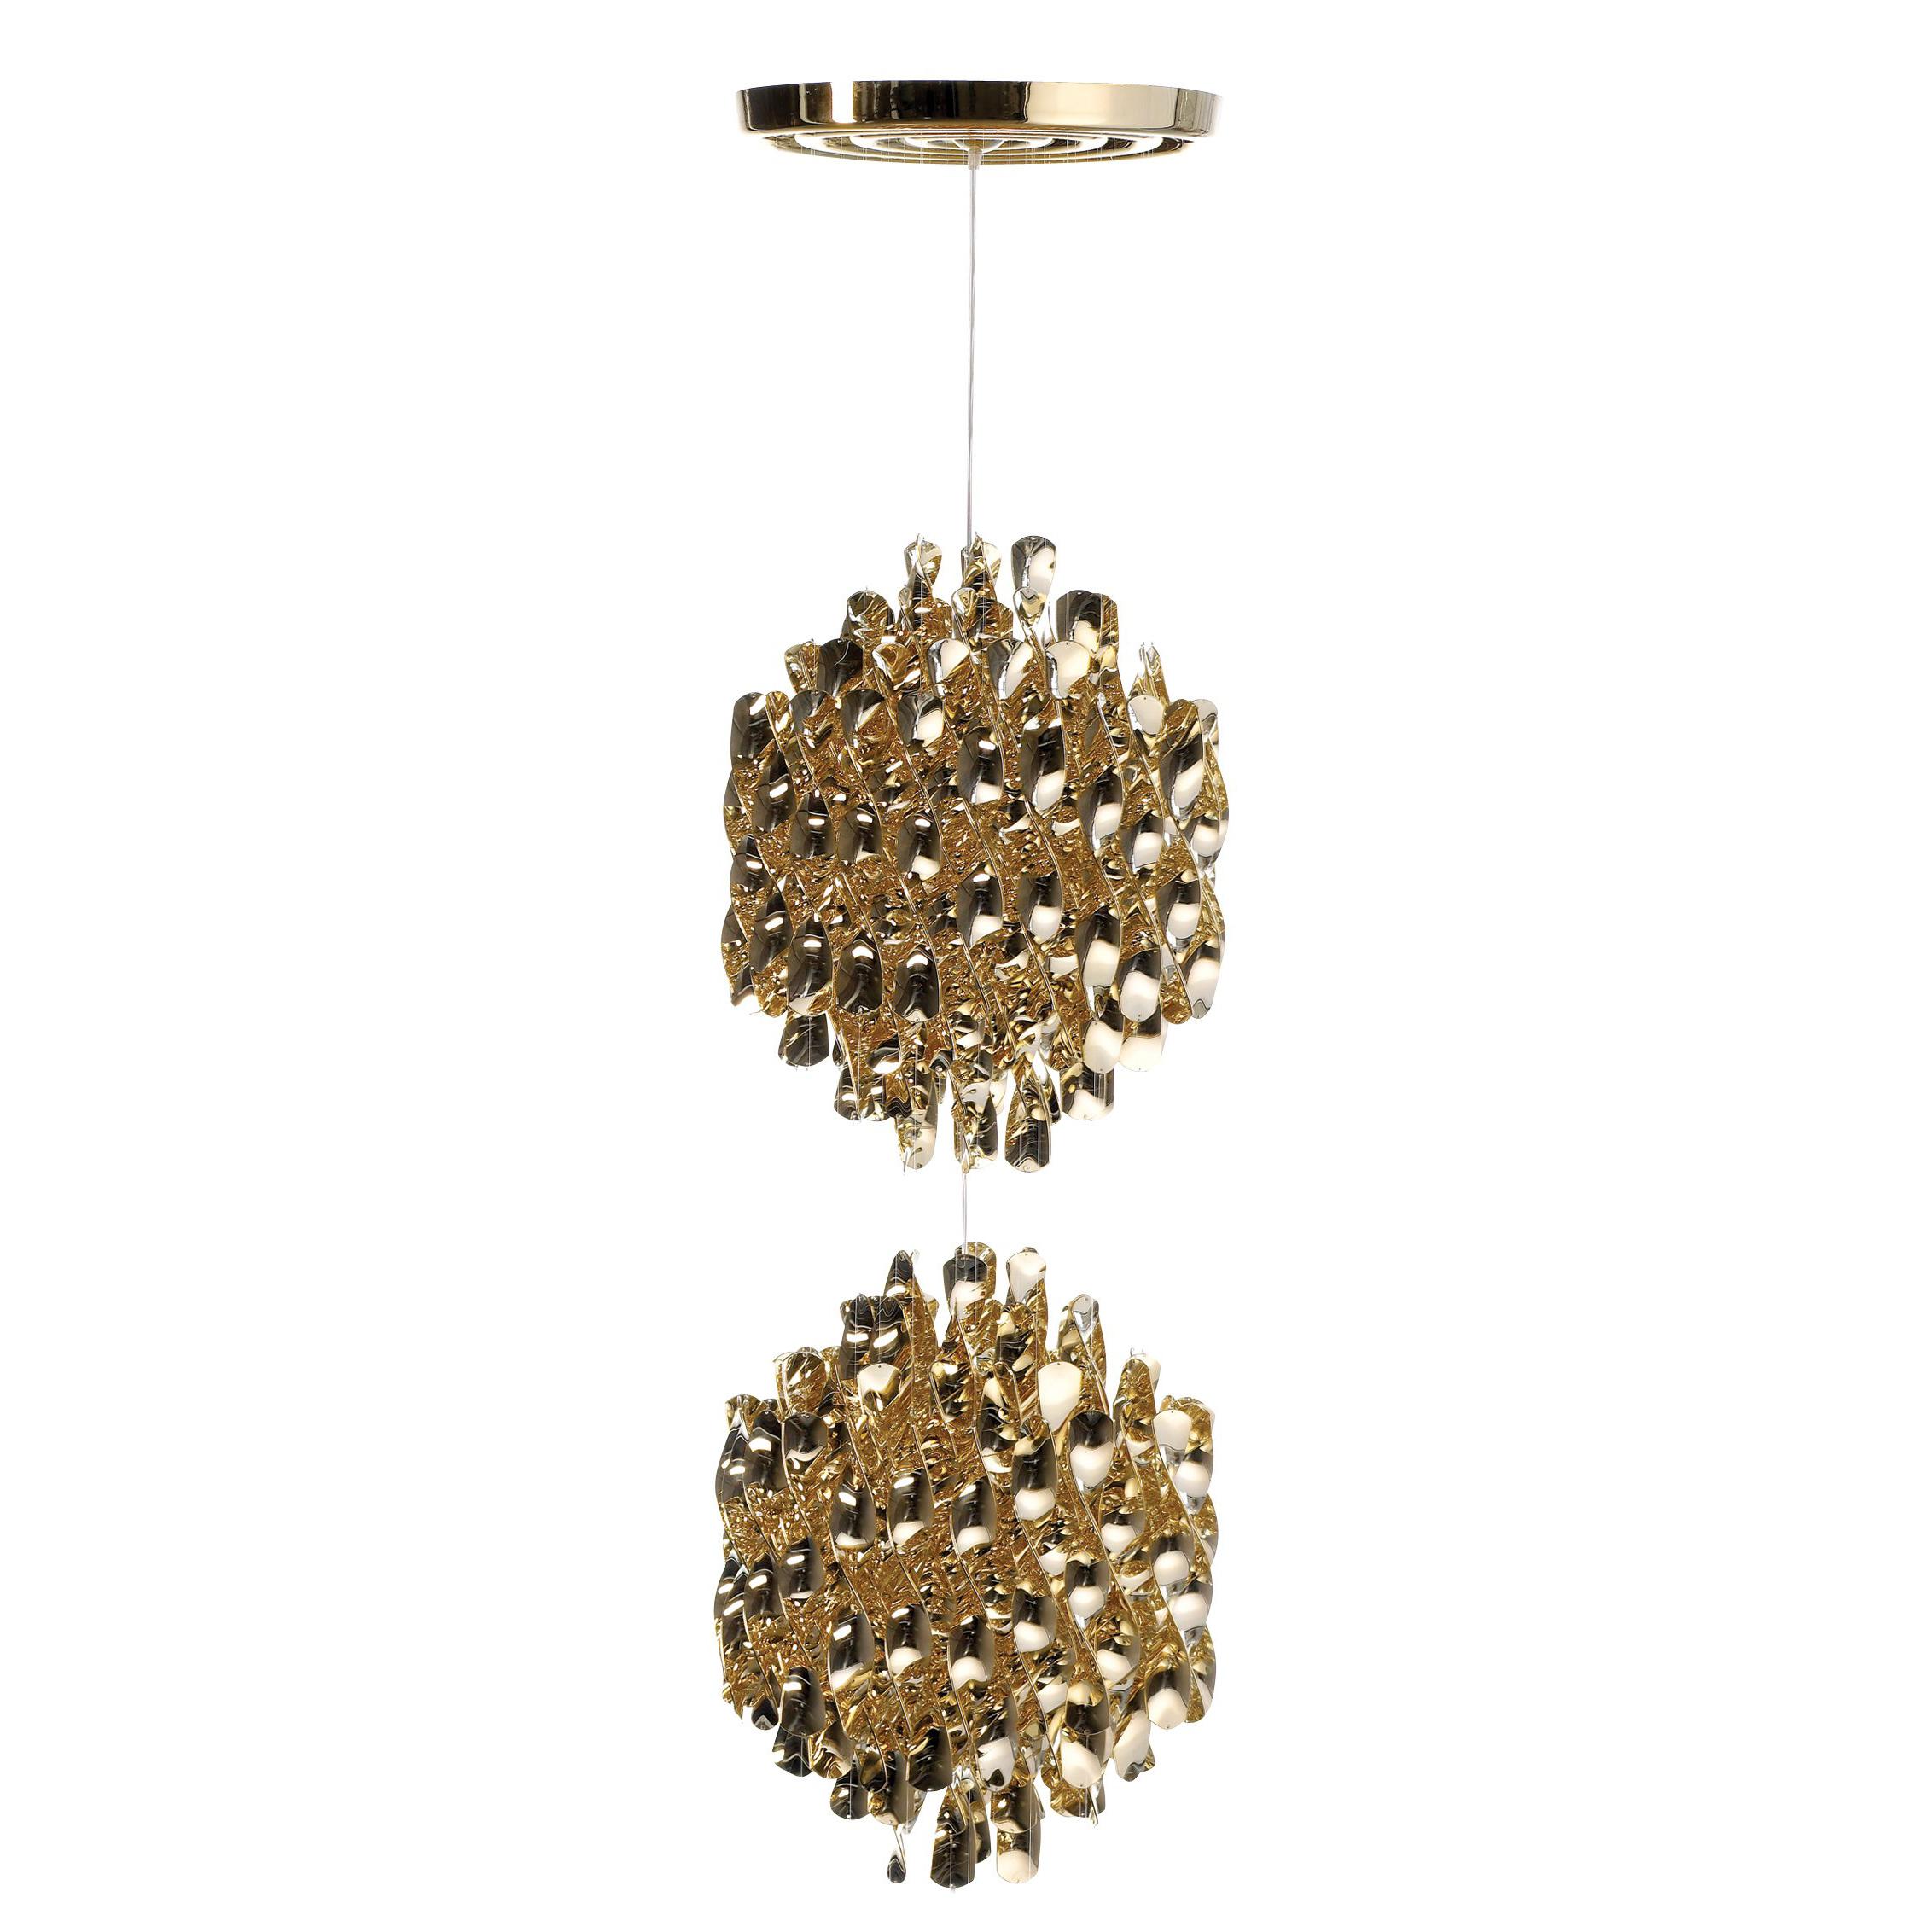 Spiral SP2 Pendant Light with Gold Finish by Verner Panton